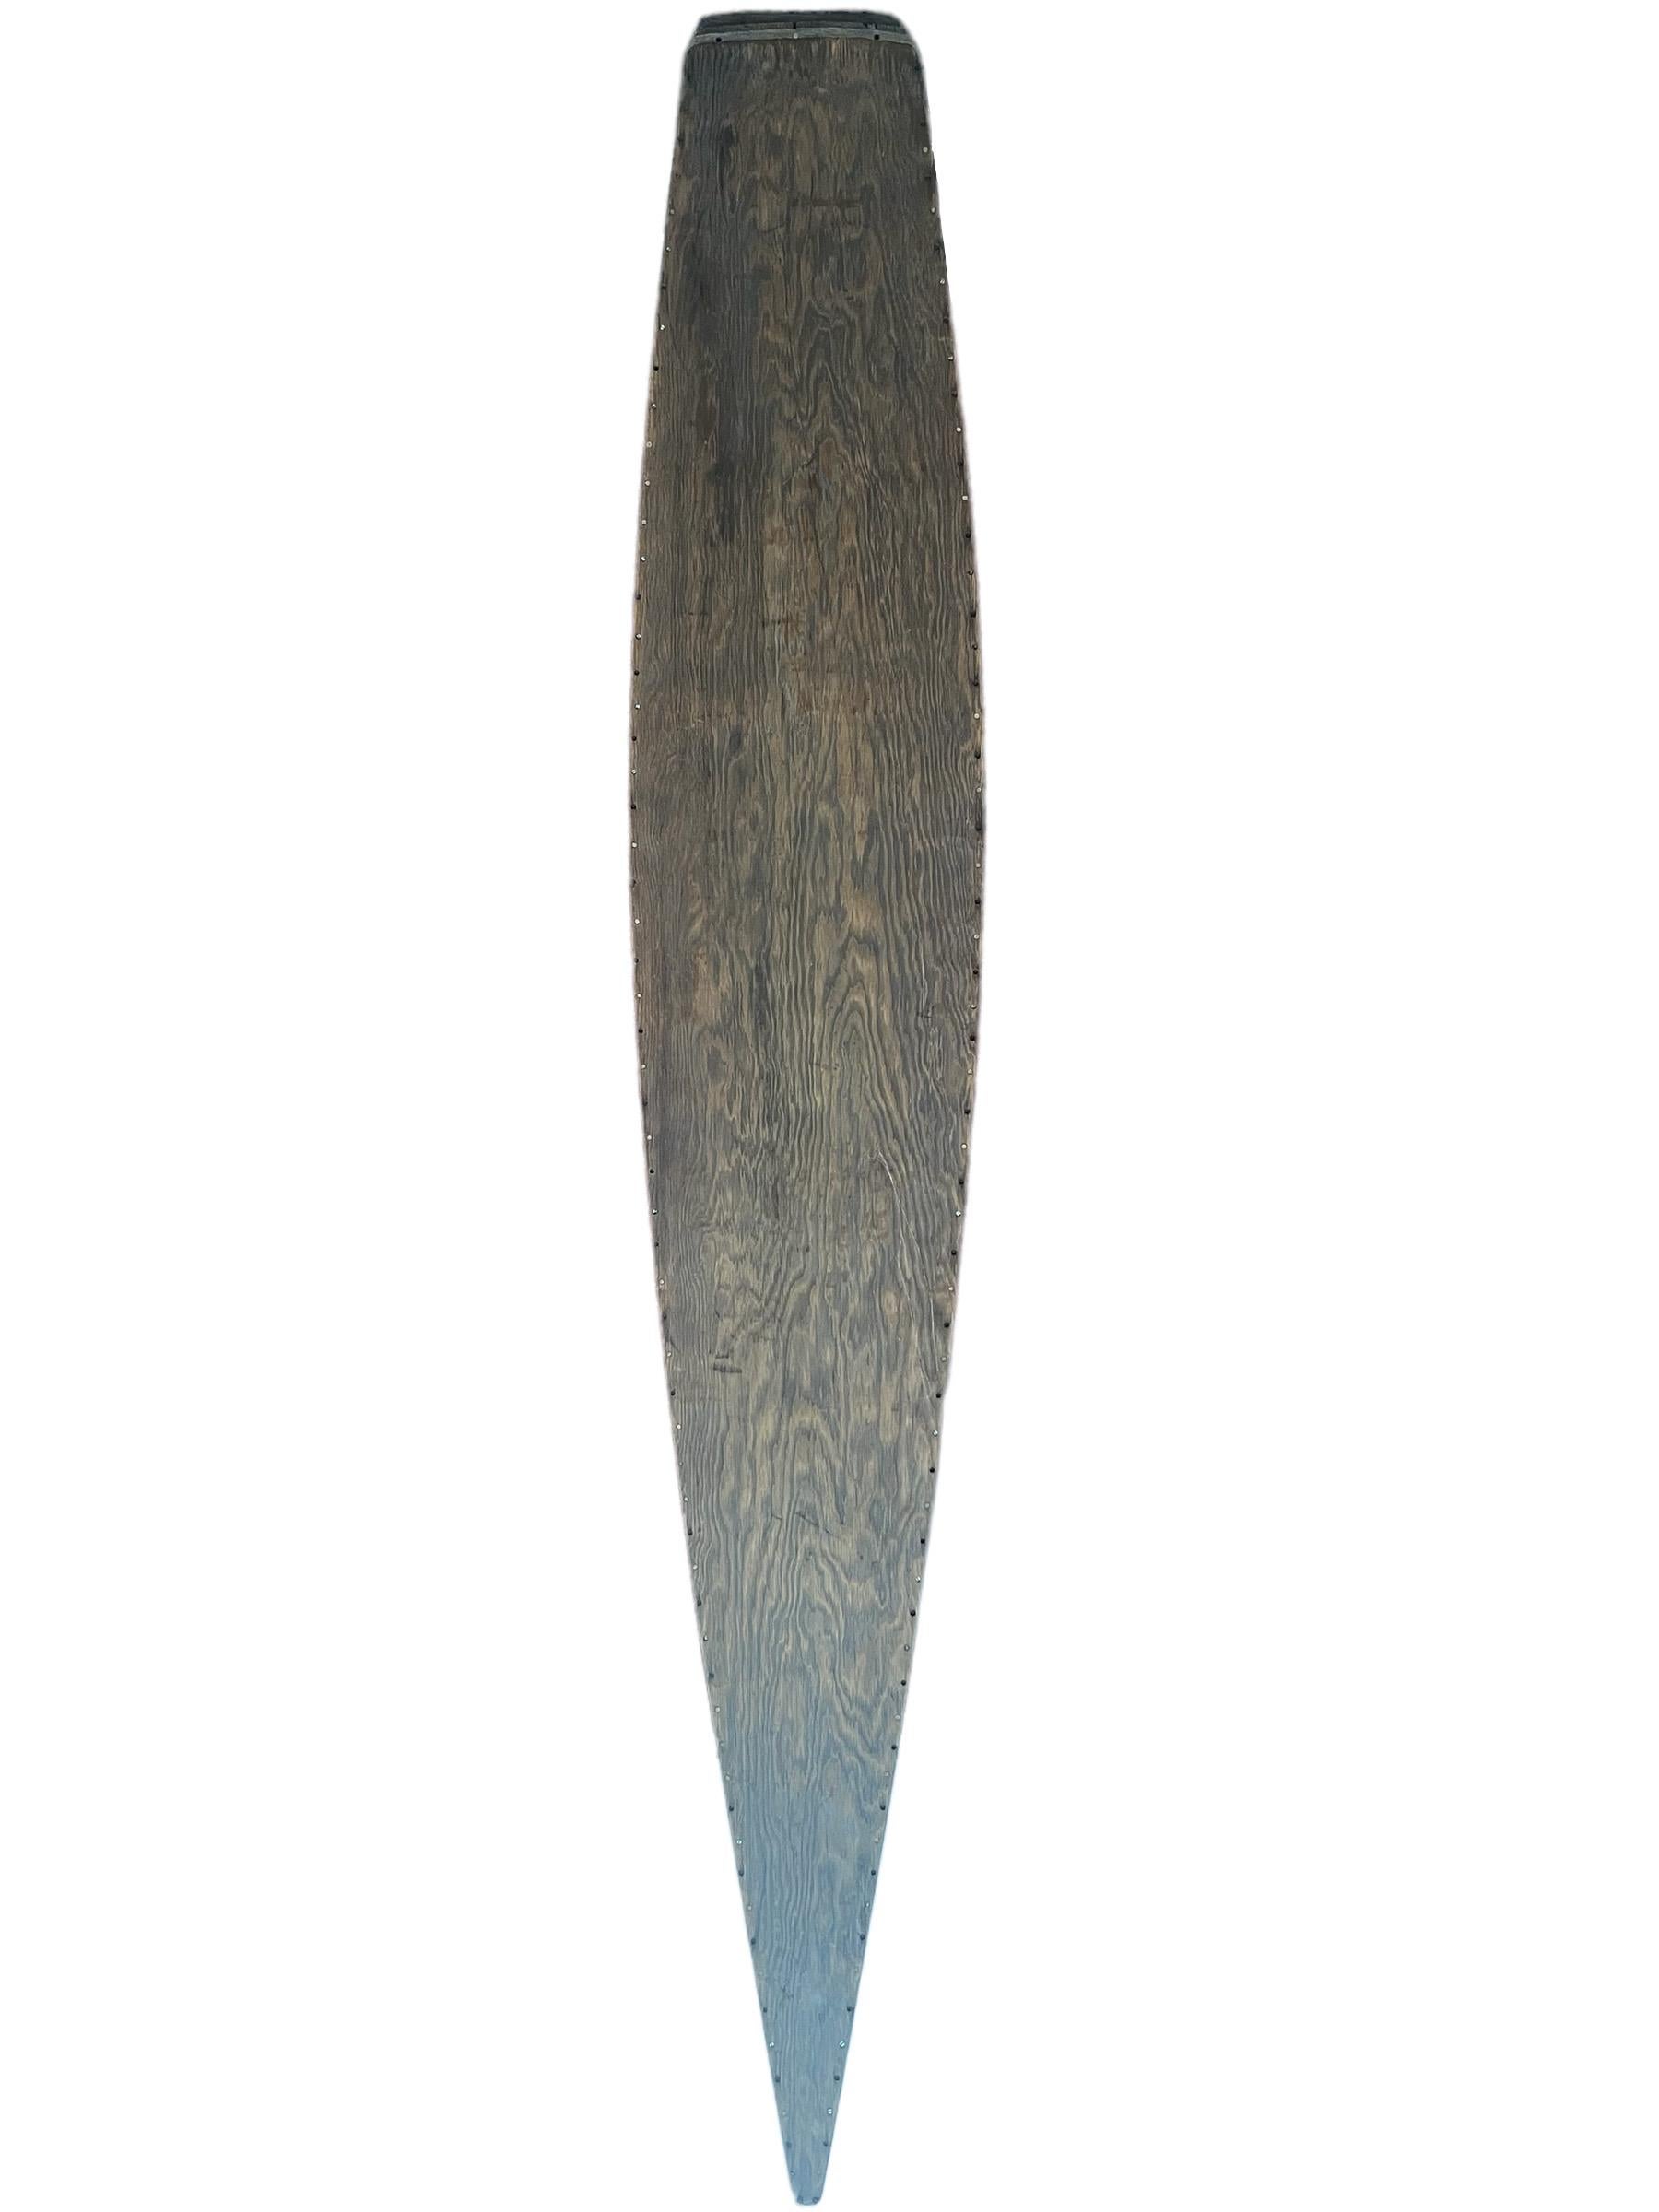 Mid-late 1930s “Kookbox” hollow wood surfboard. Features wood panels joined by metal fasteners and cork water-plug. Patented interior ‘Skin and Frame’ construction method, inspired by the design of airplane wings. This breakthrough surfboard